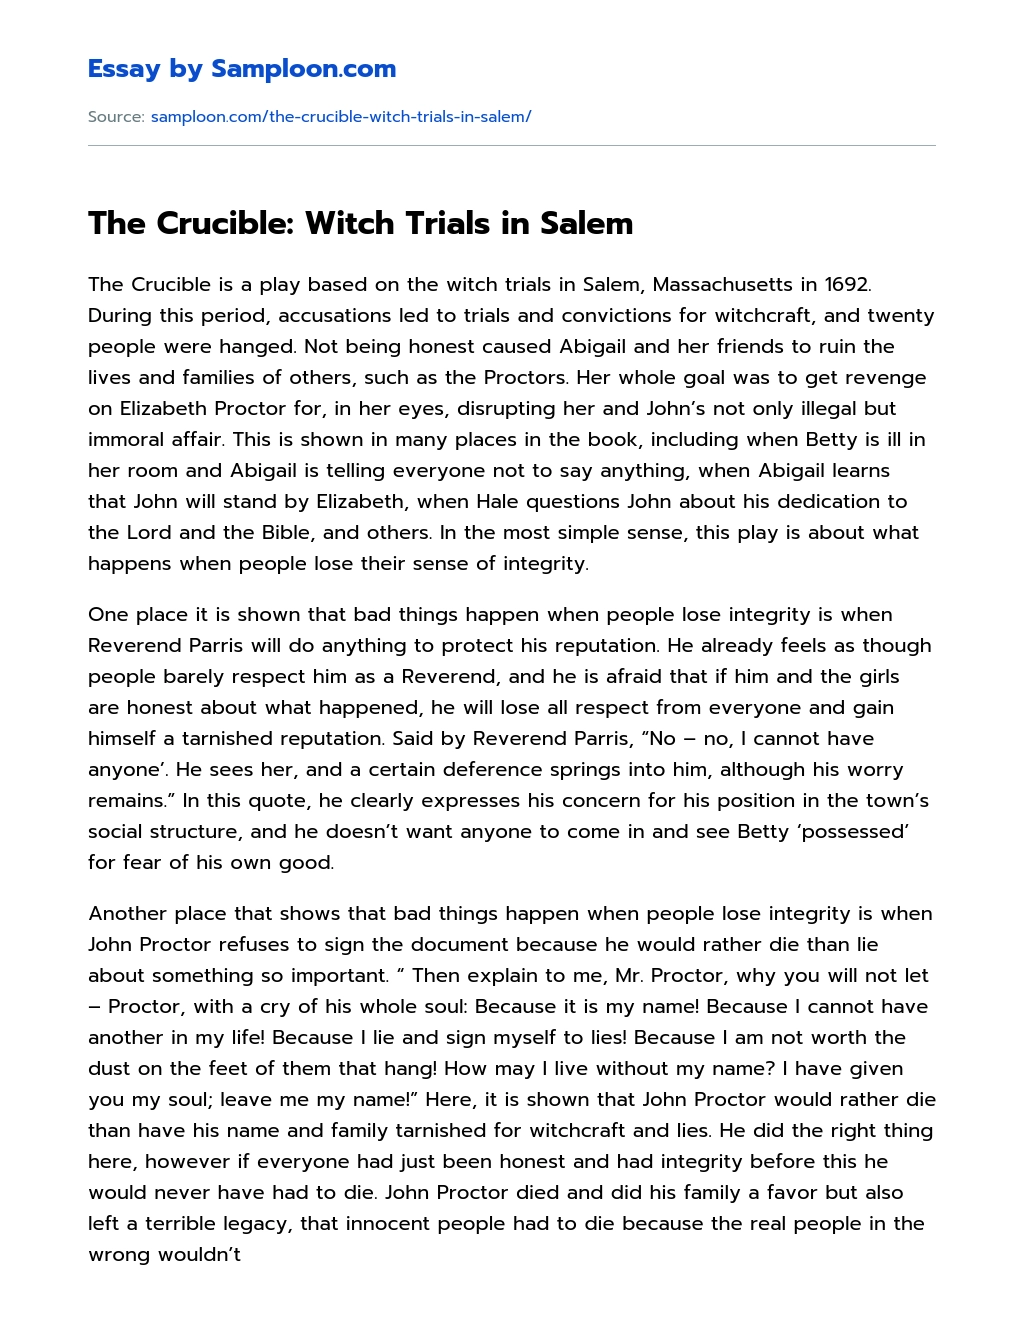 The Crucible: Witch Trials in Salem essay